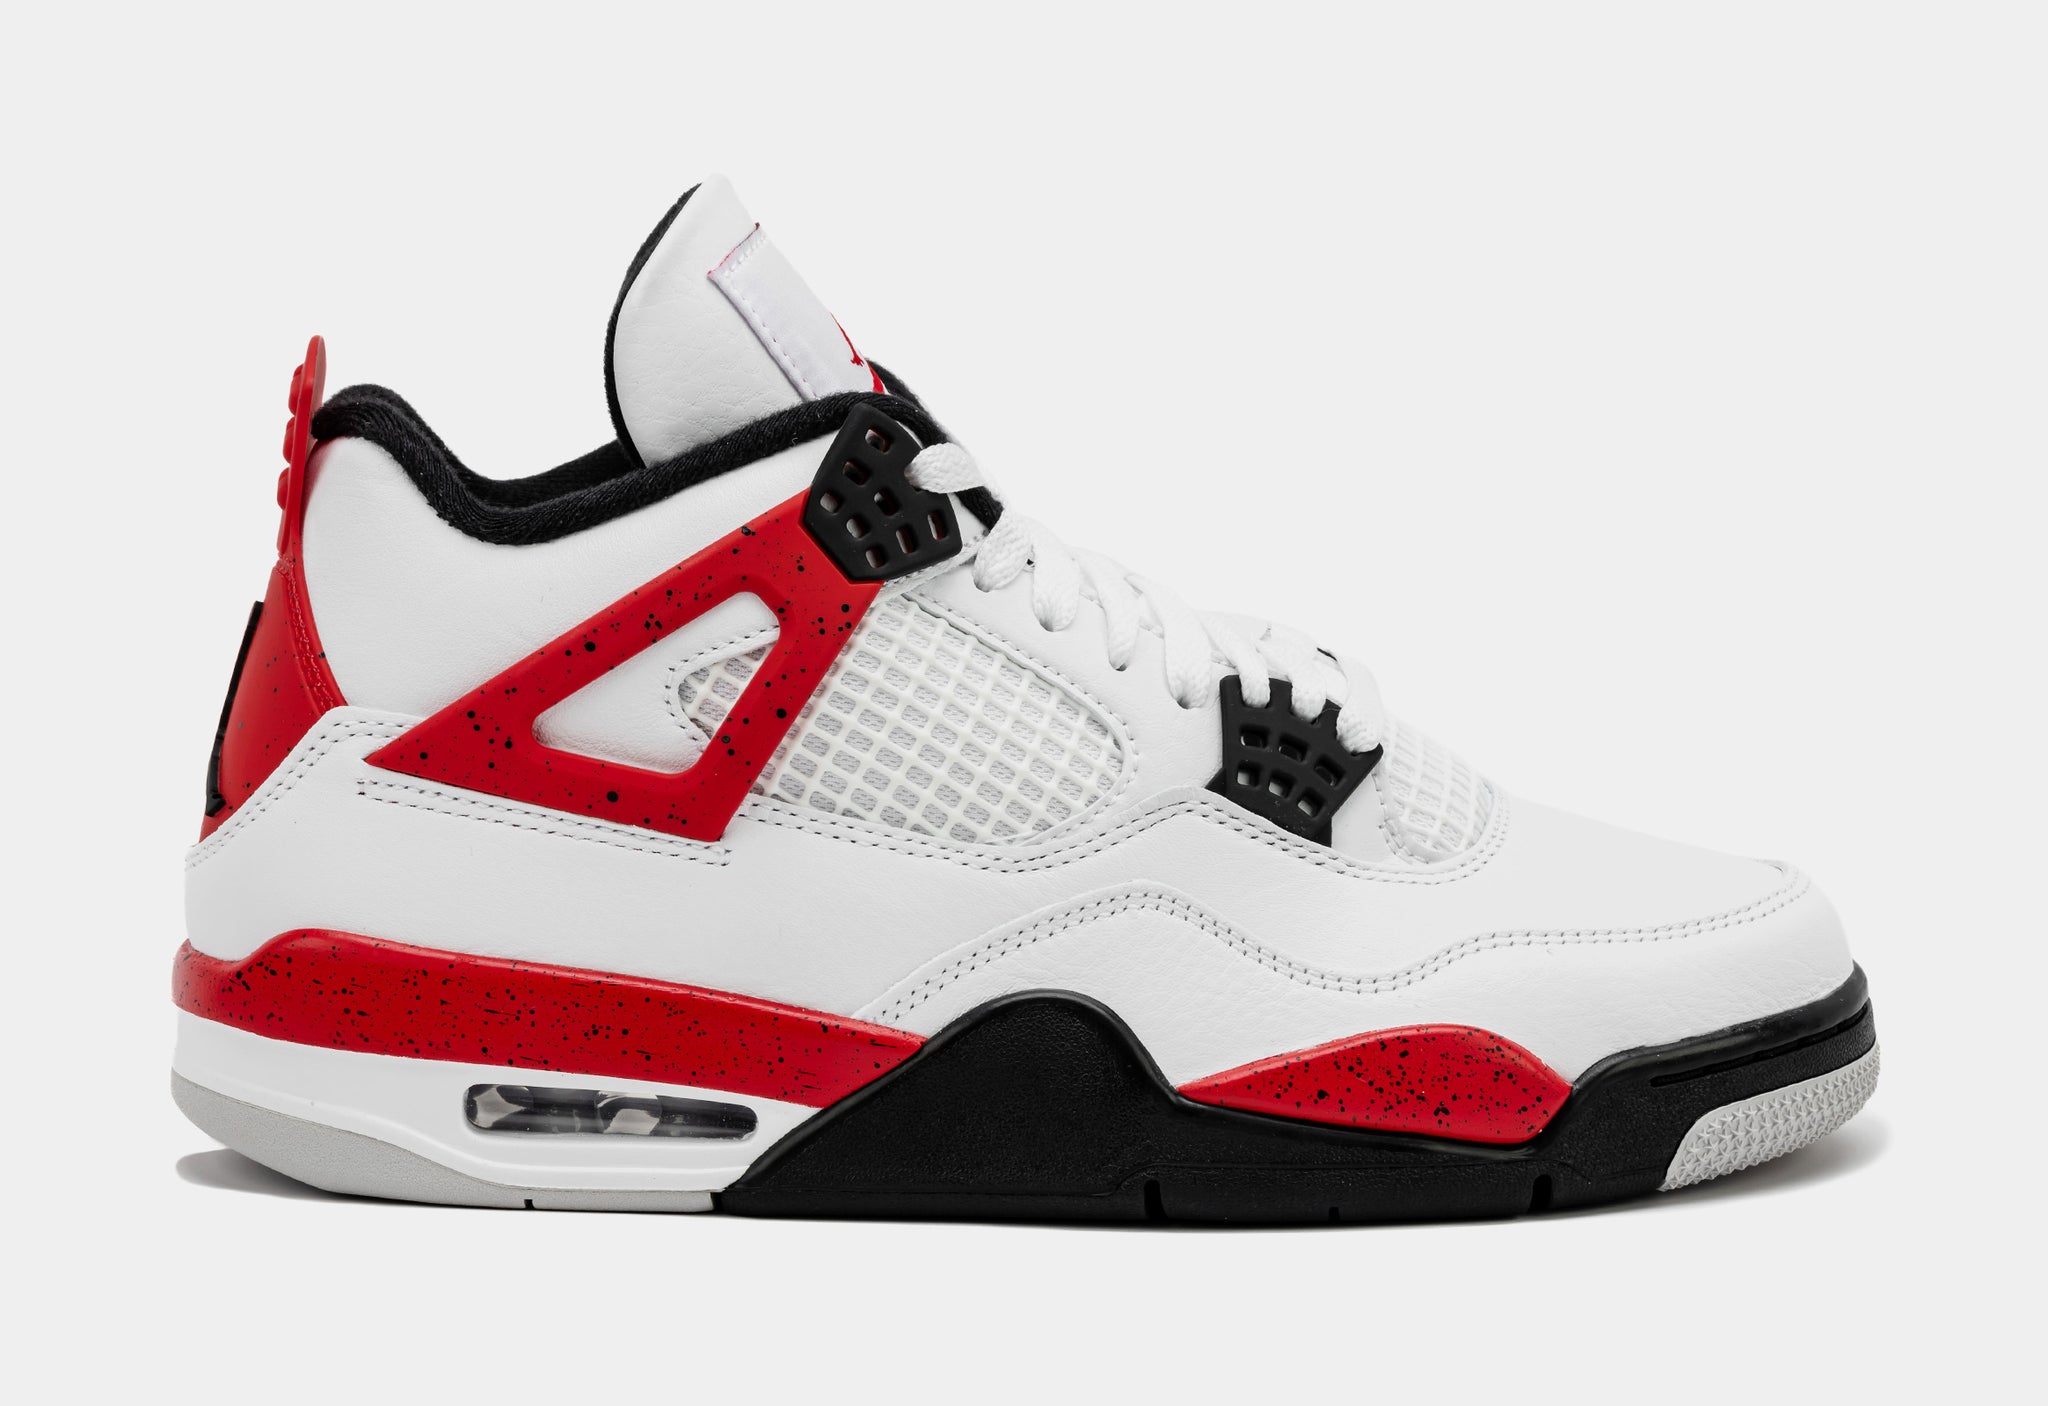 Air Jordan 4 Retro Red Cement Mens Lifestyle Shoes (White/Red) Free Shipping